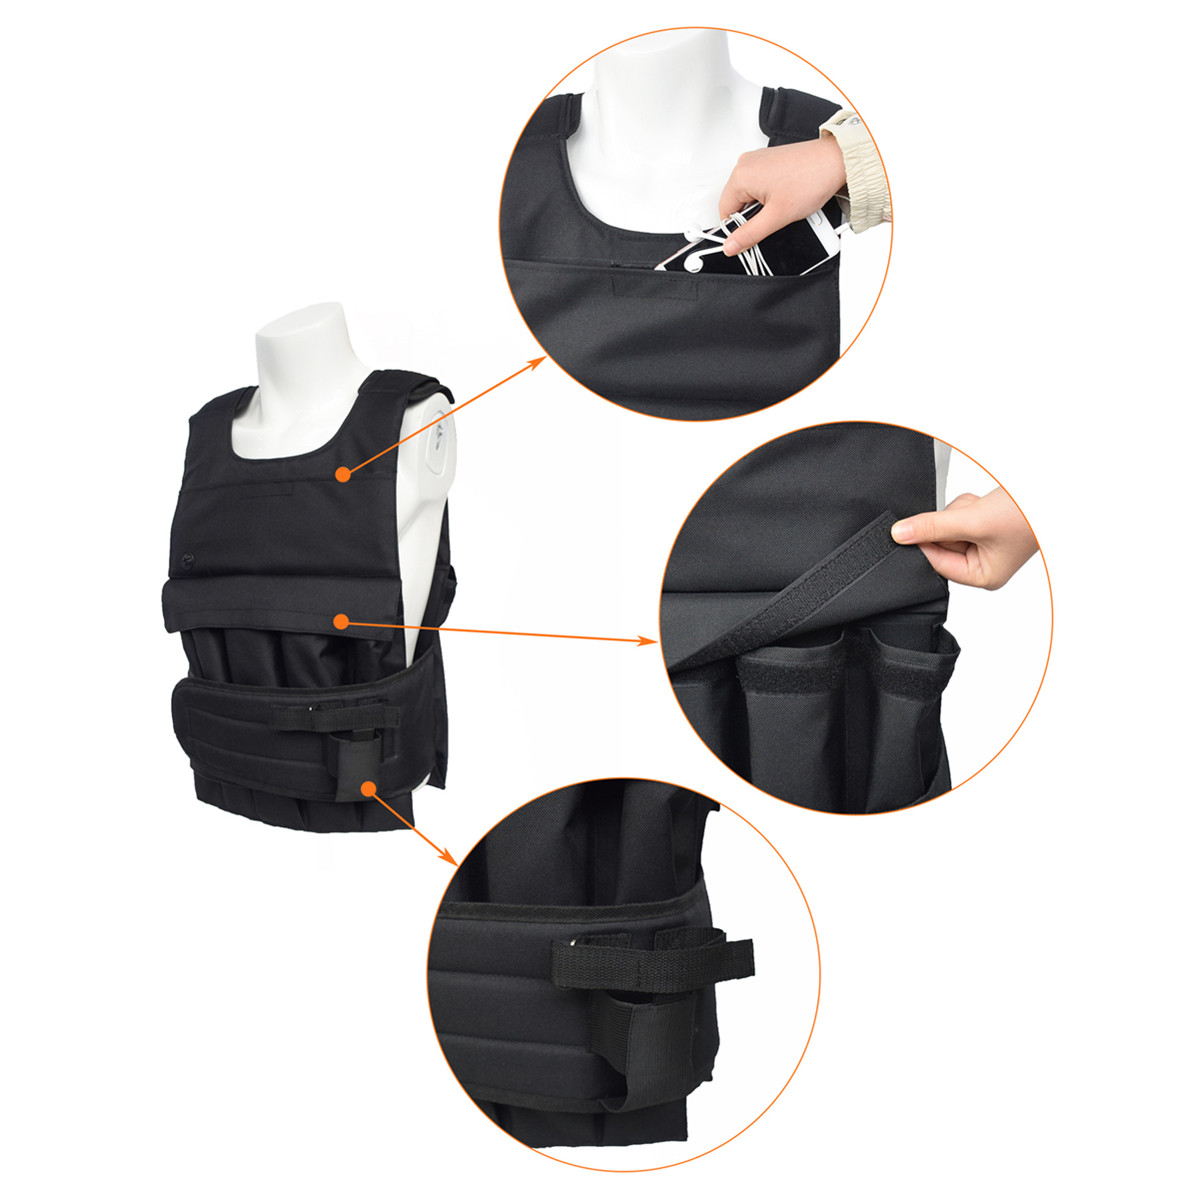 Adjustable-Weight-Vest-Outdoor-Training-Physical-Exercise-Slimming-Running-trainingWeight-Bearing-Wa-1695499-5